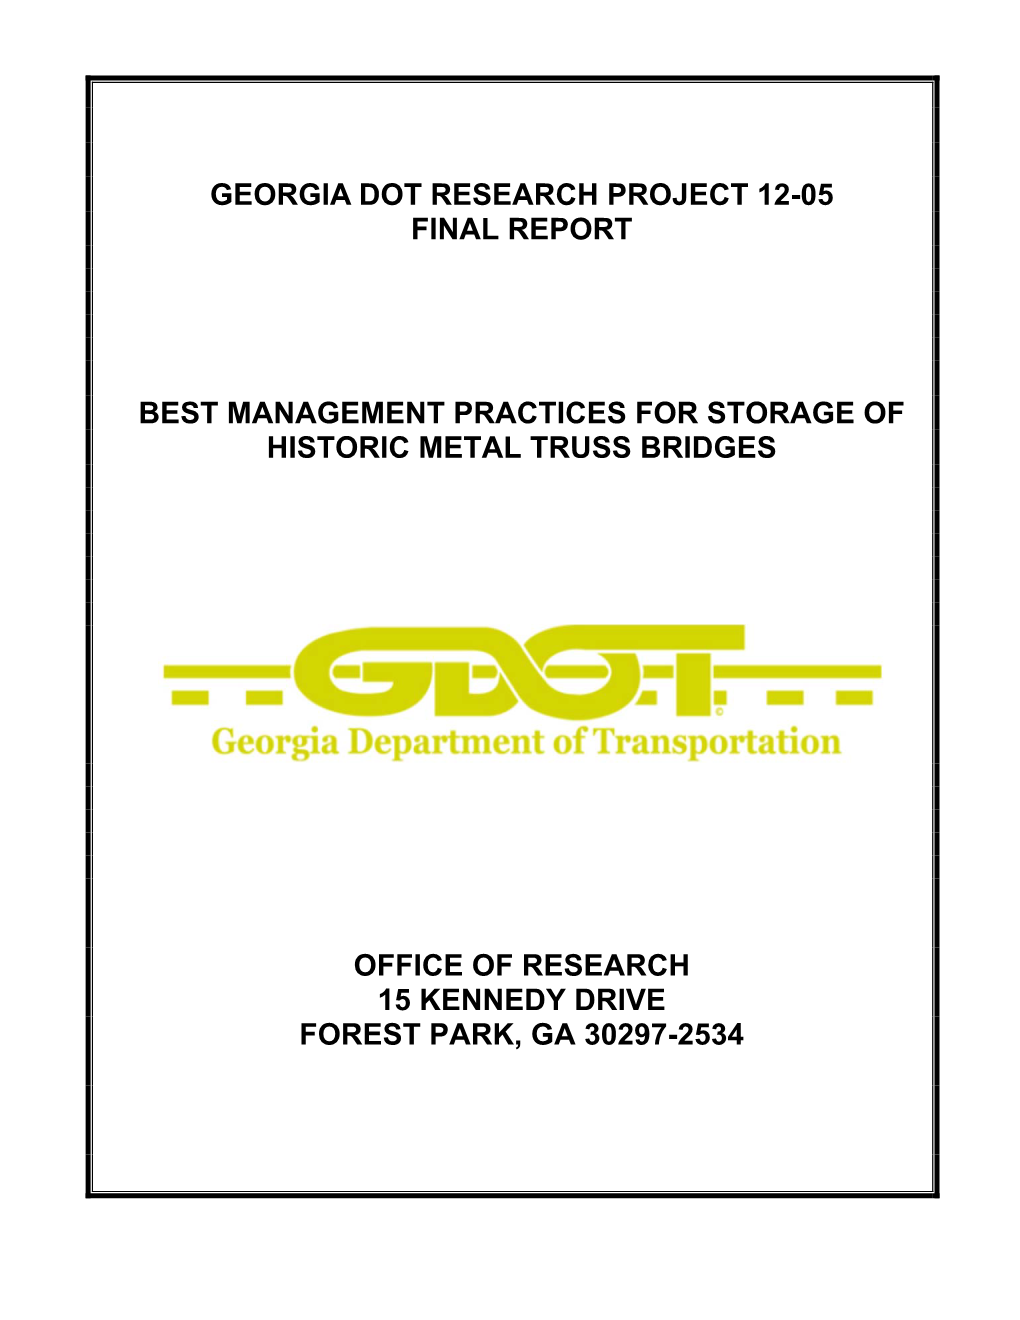 Georgia Dot Research Project 12-05 Final Report